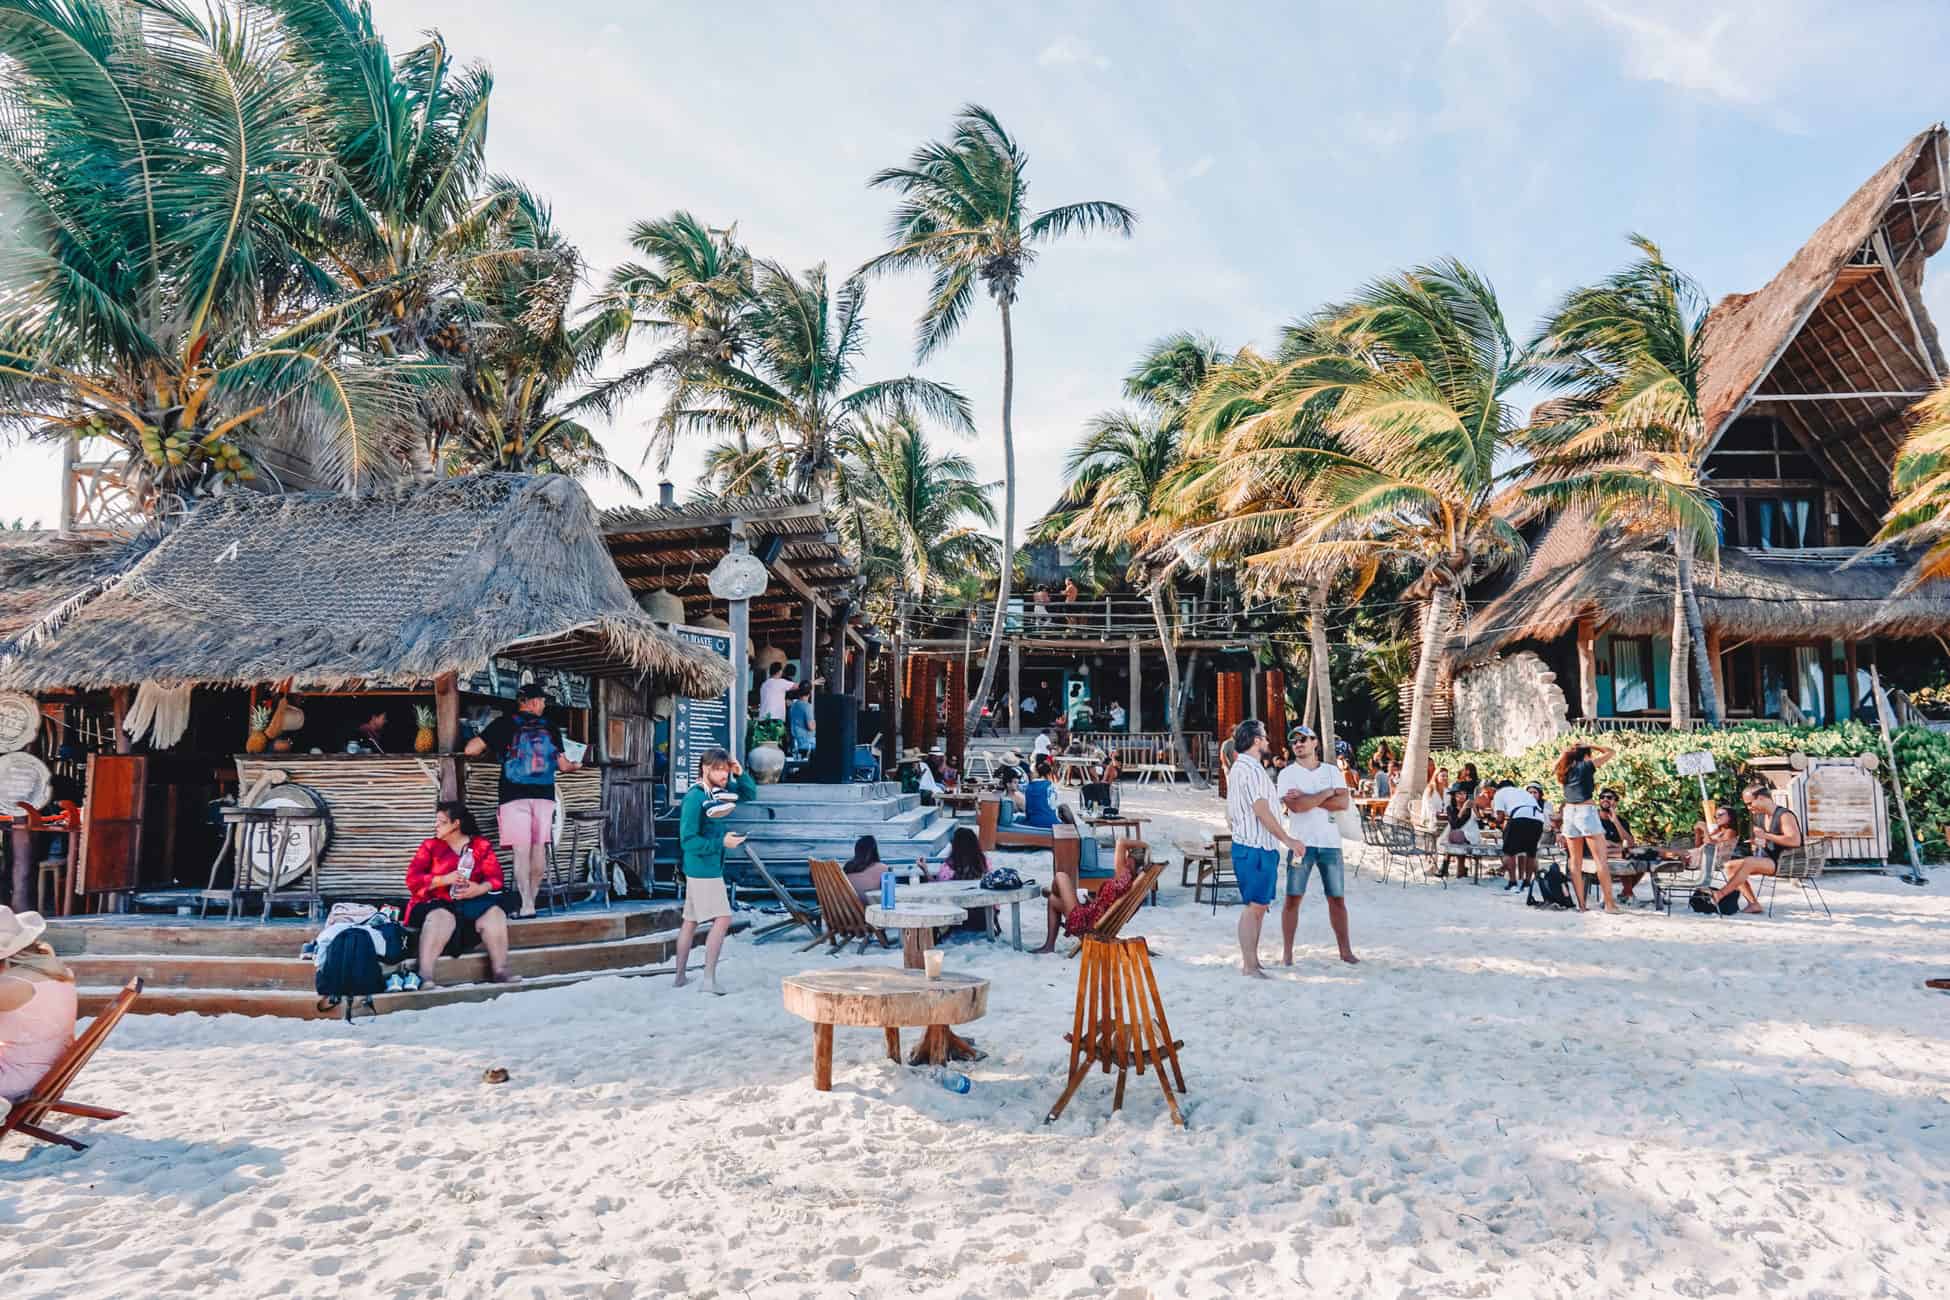 How expensive is Tulum? The budget you need for a week in Tulum!